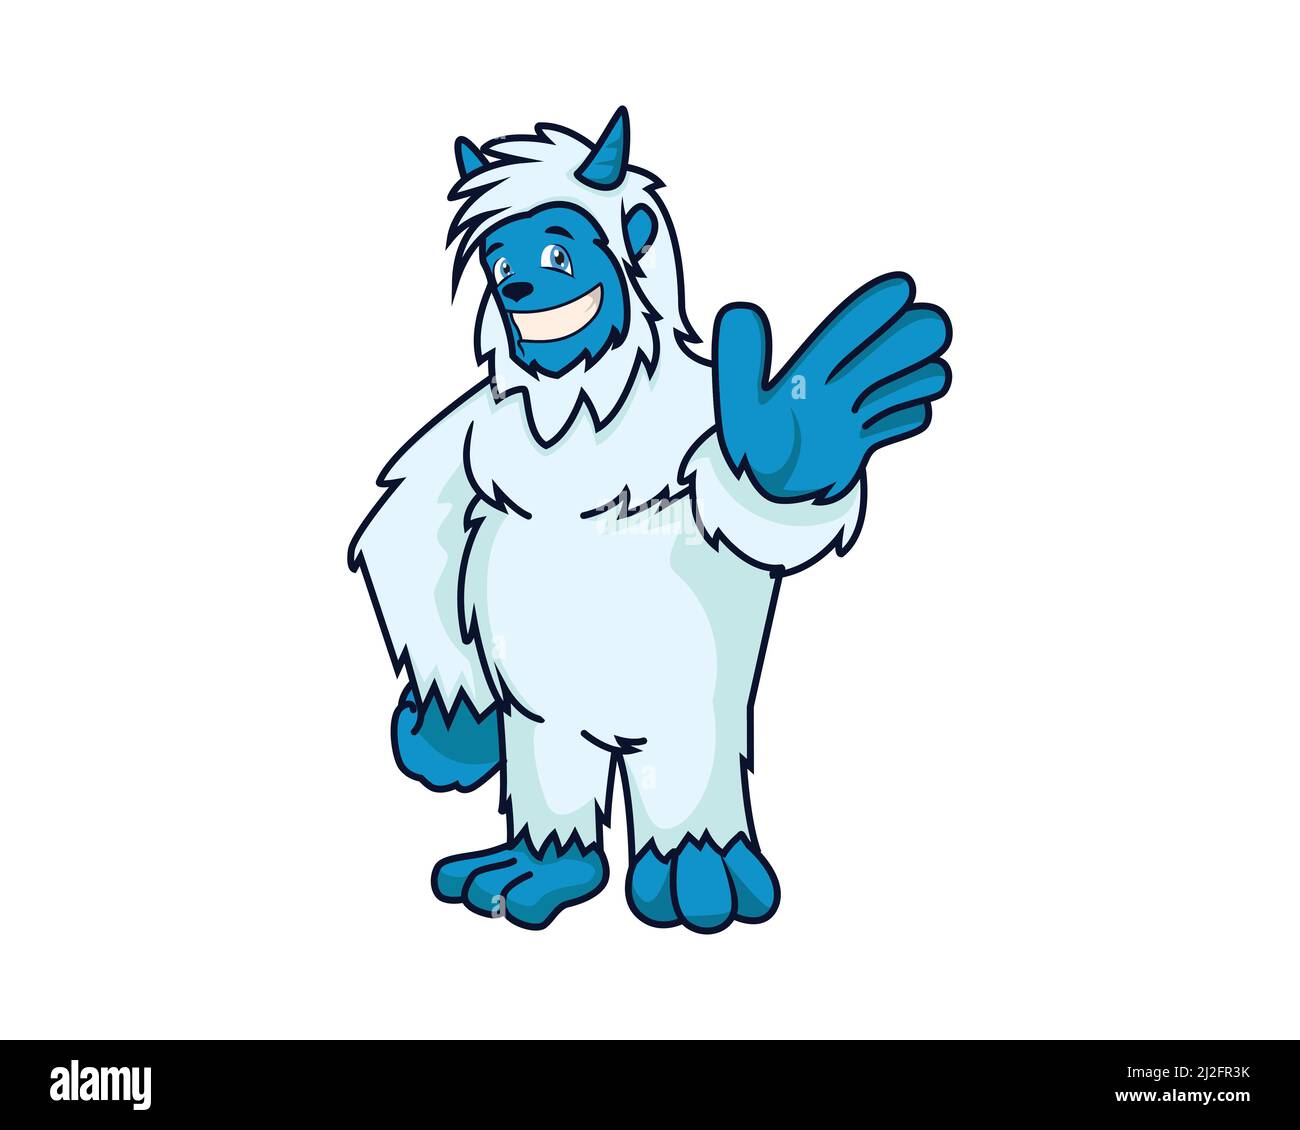 Detailed Friendly and Attractive Yeti Mascot and Character Illustration Vector Stock Vector